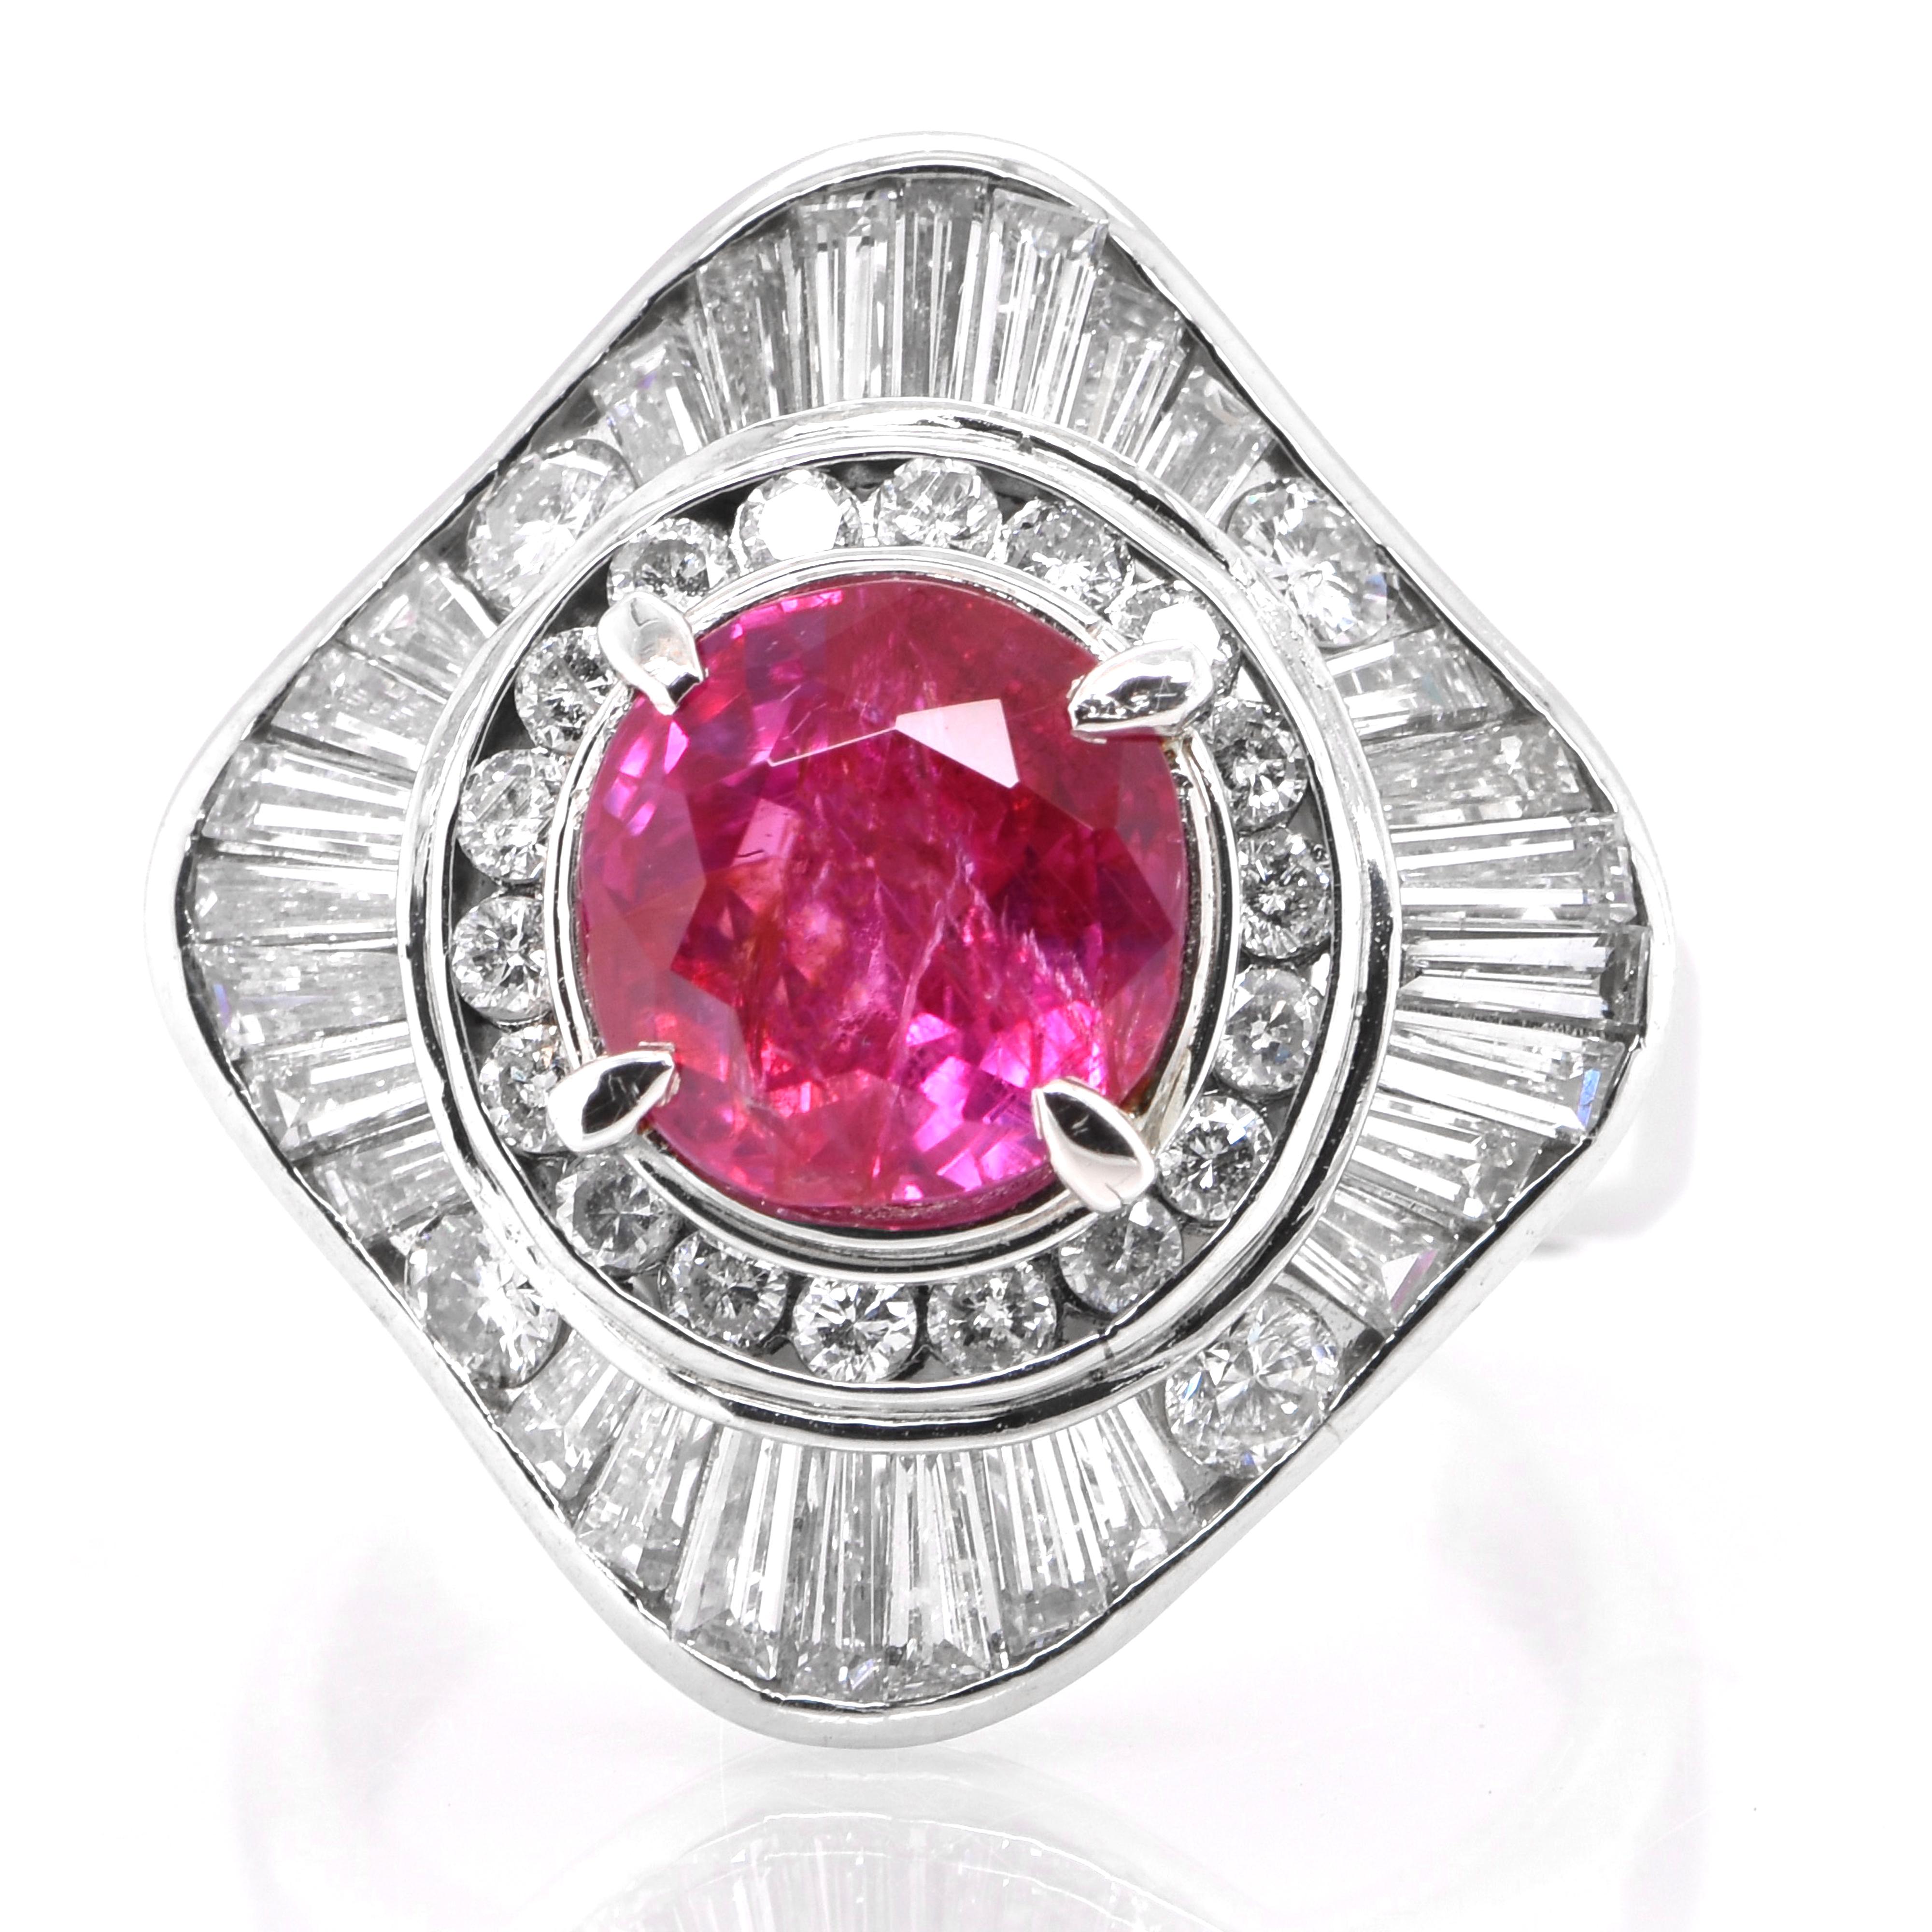 Modern Vintage 3.32 Carat Natural Ruby and Diamond Ring Set in Platinum For Sale